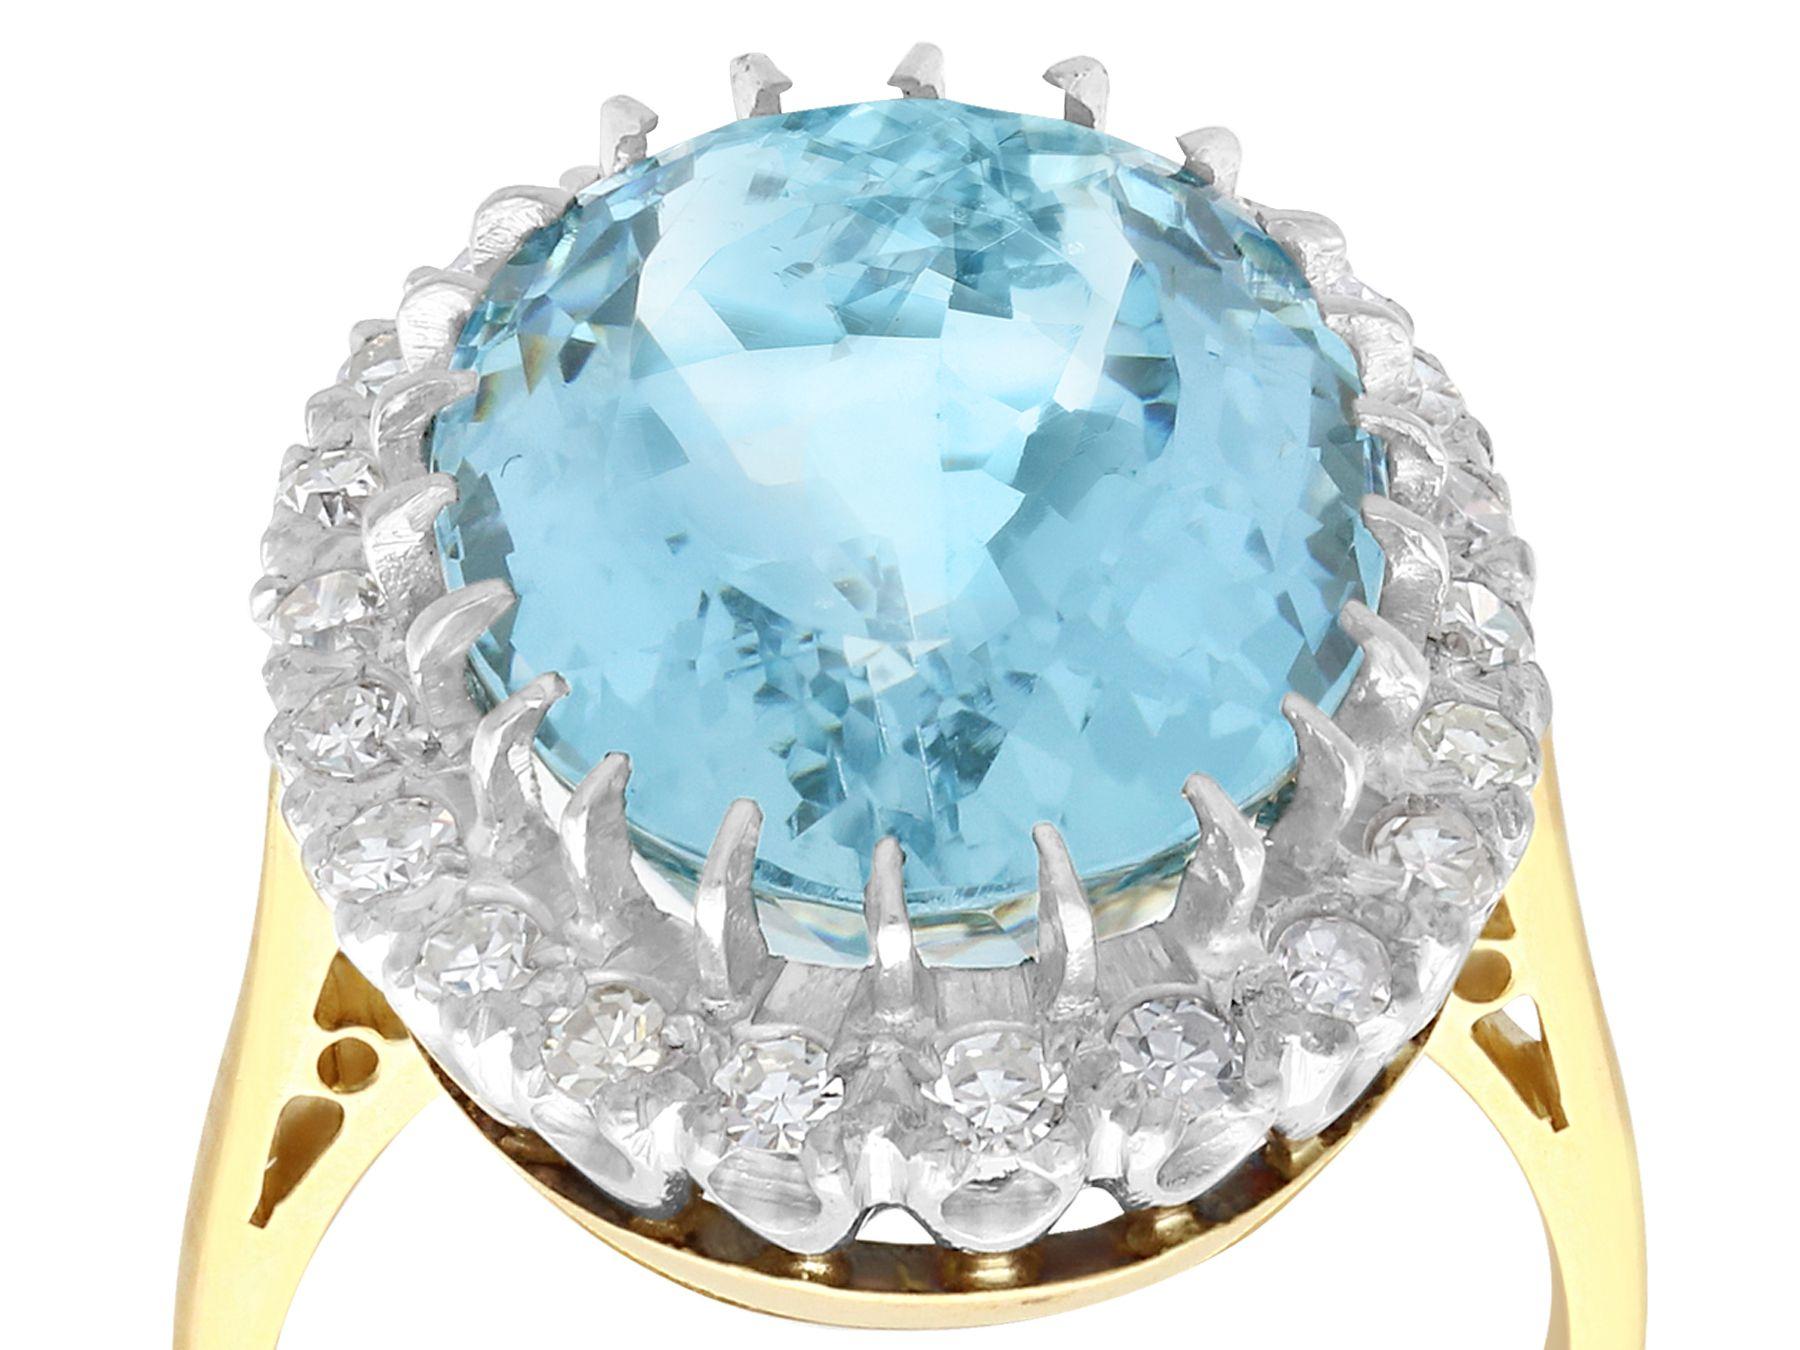 A stunning, fine and impressive antique 10.79 carat aquamarine and 0.66 carat diamond, 18 karat yellow gold and 18k white gold set cocktail ring; part of our diverse aquamarine jewelry and estate jewelry collections

This stunning antique aquamarine